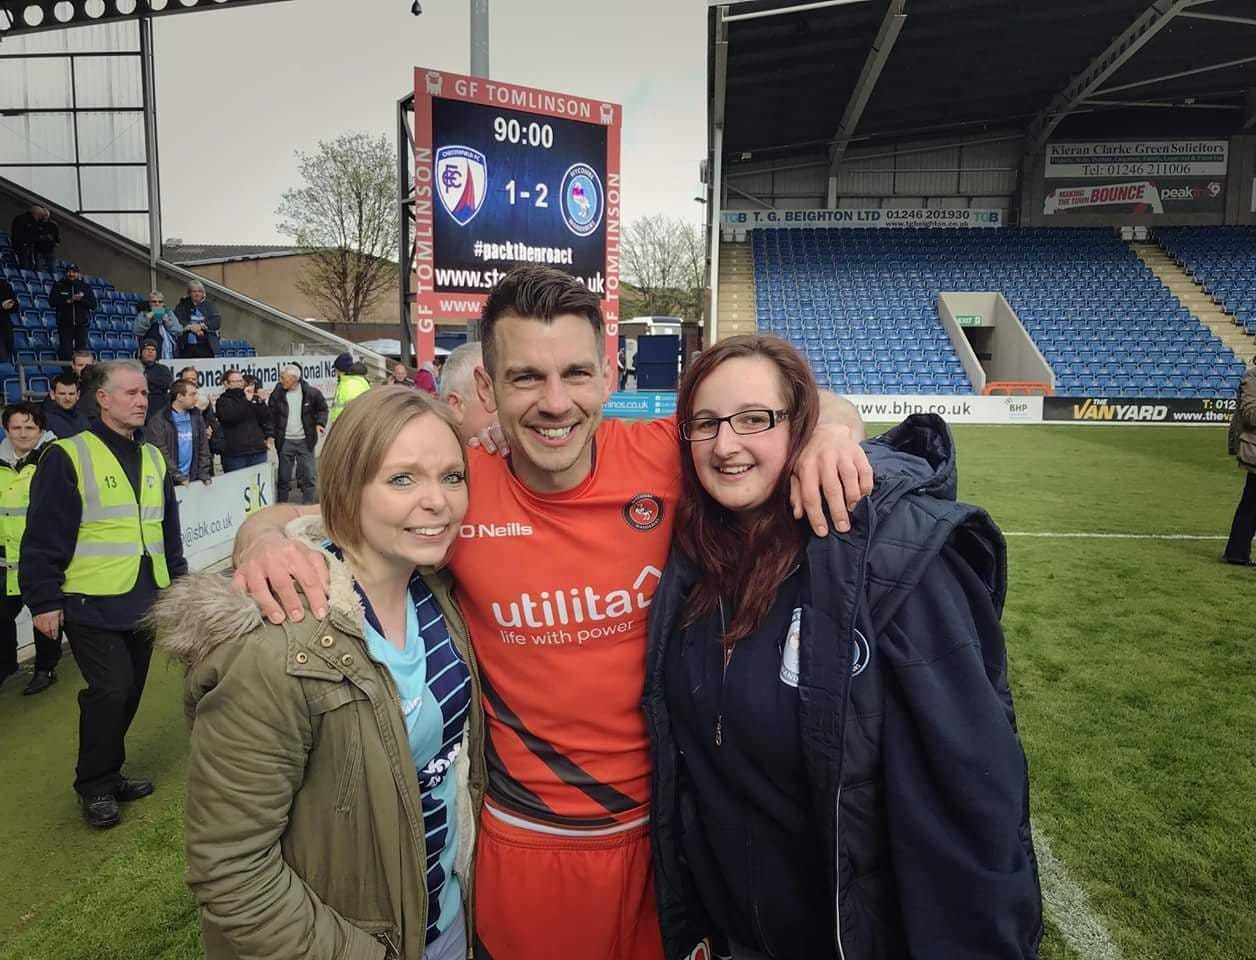 (Rachel Tillman: Promotion at Chesterfield....the steward lady was trying to usher Sarah and I off the pitch when we found Bloomfield and she left us alone once he started celebrating with us)